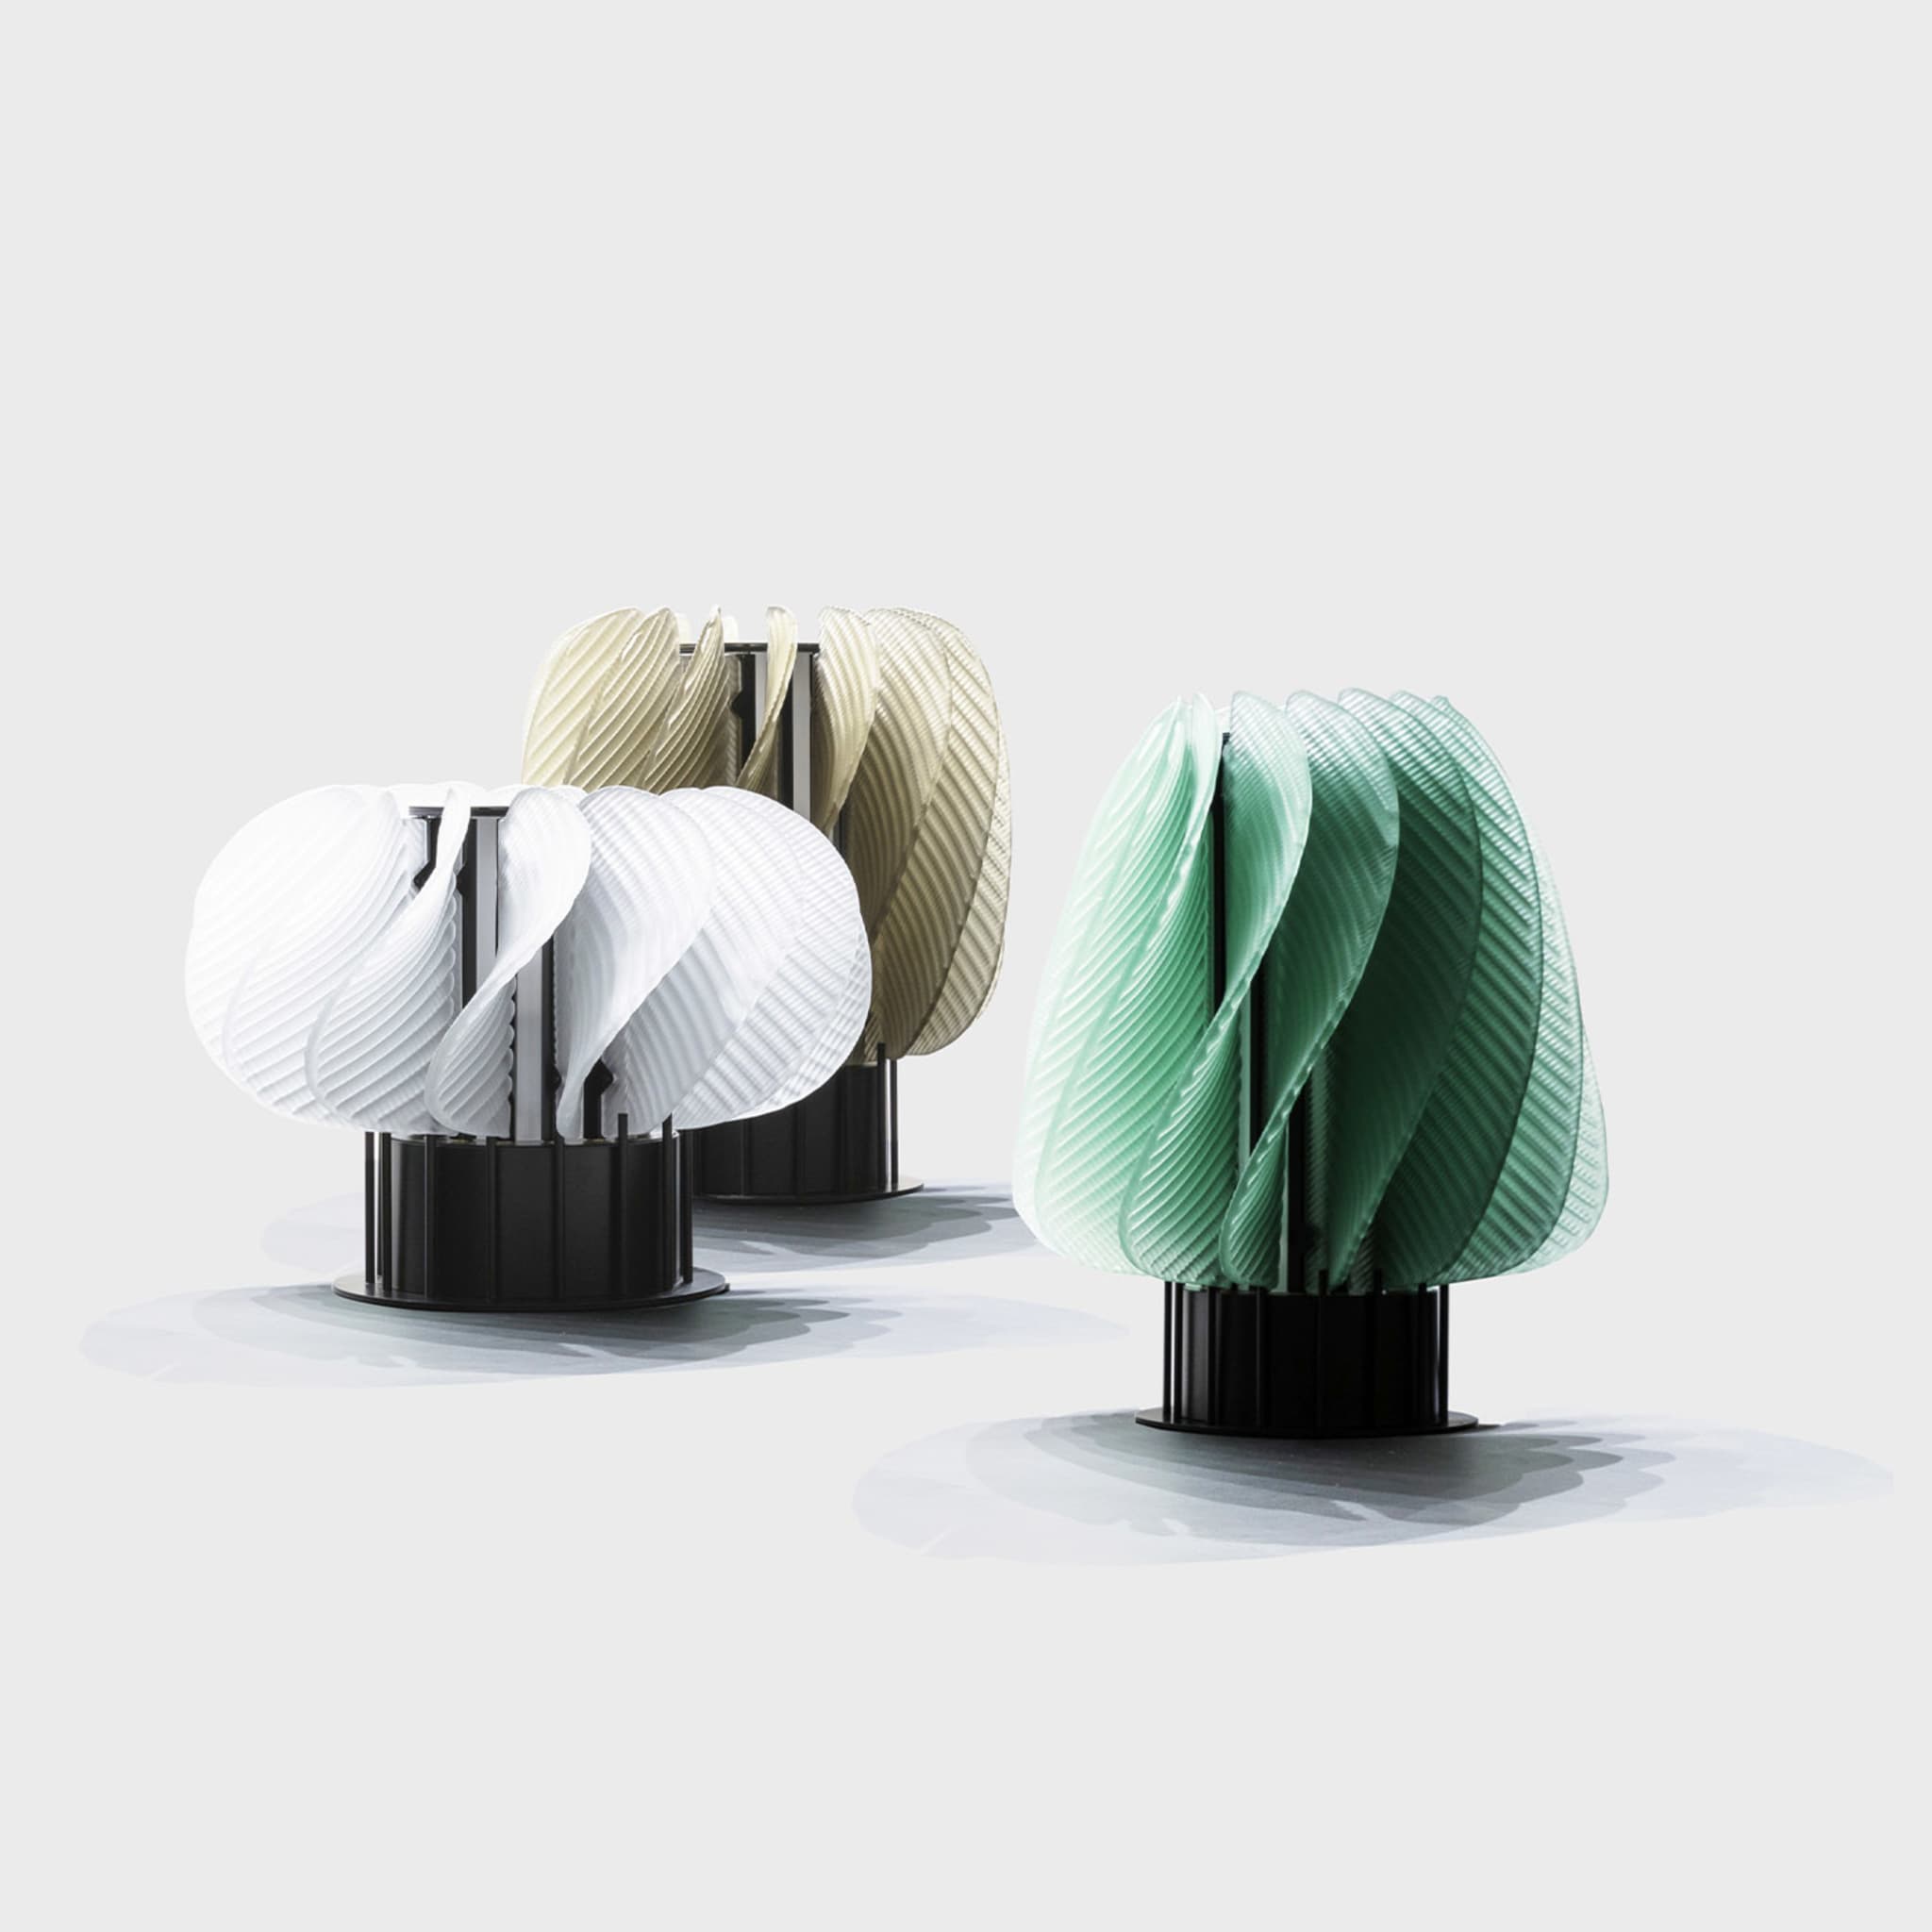 Horah Model 05 Table Lamp by Raw Edges - Alternative view 1